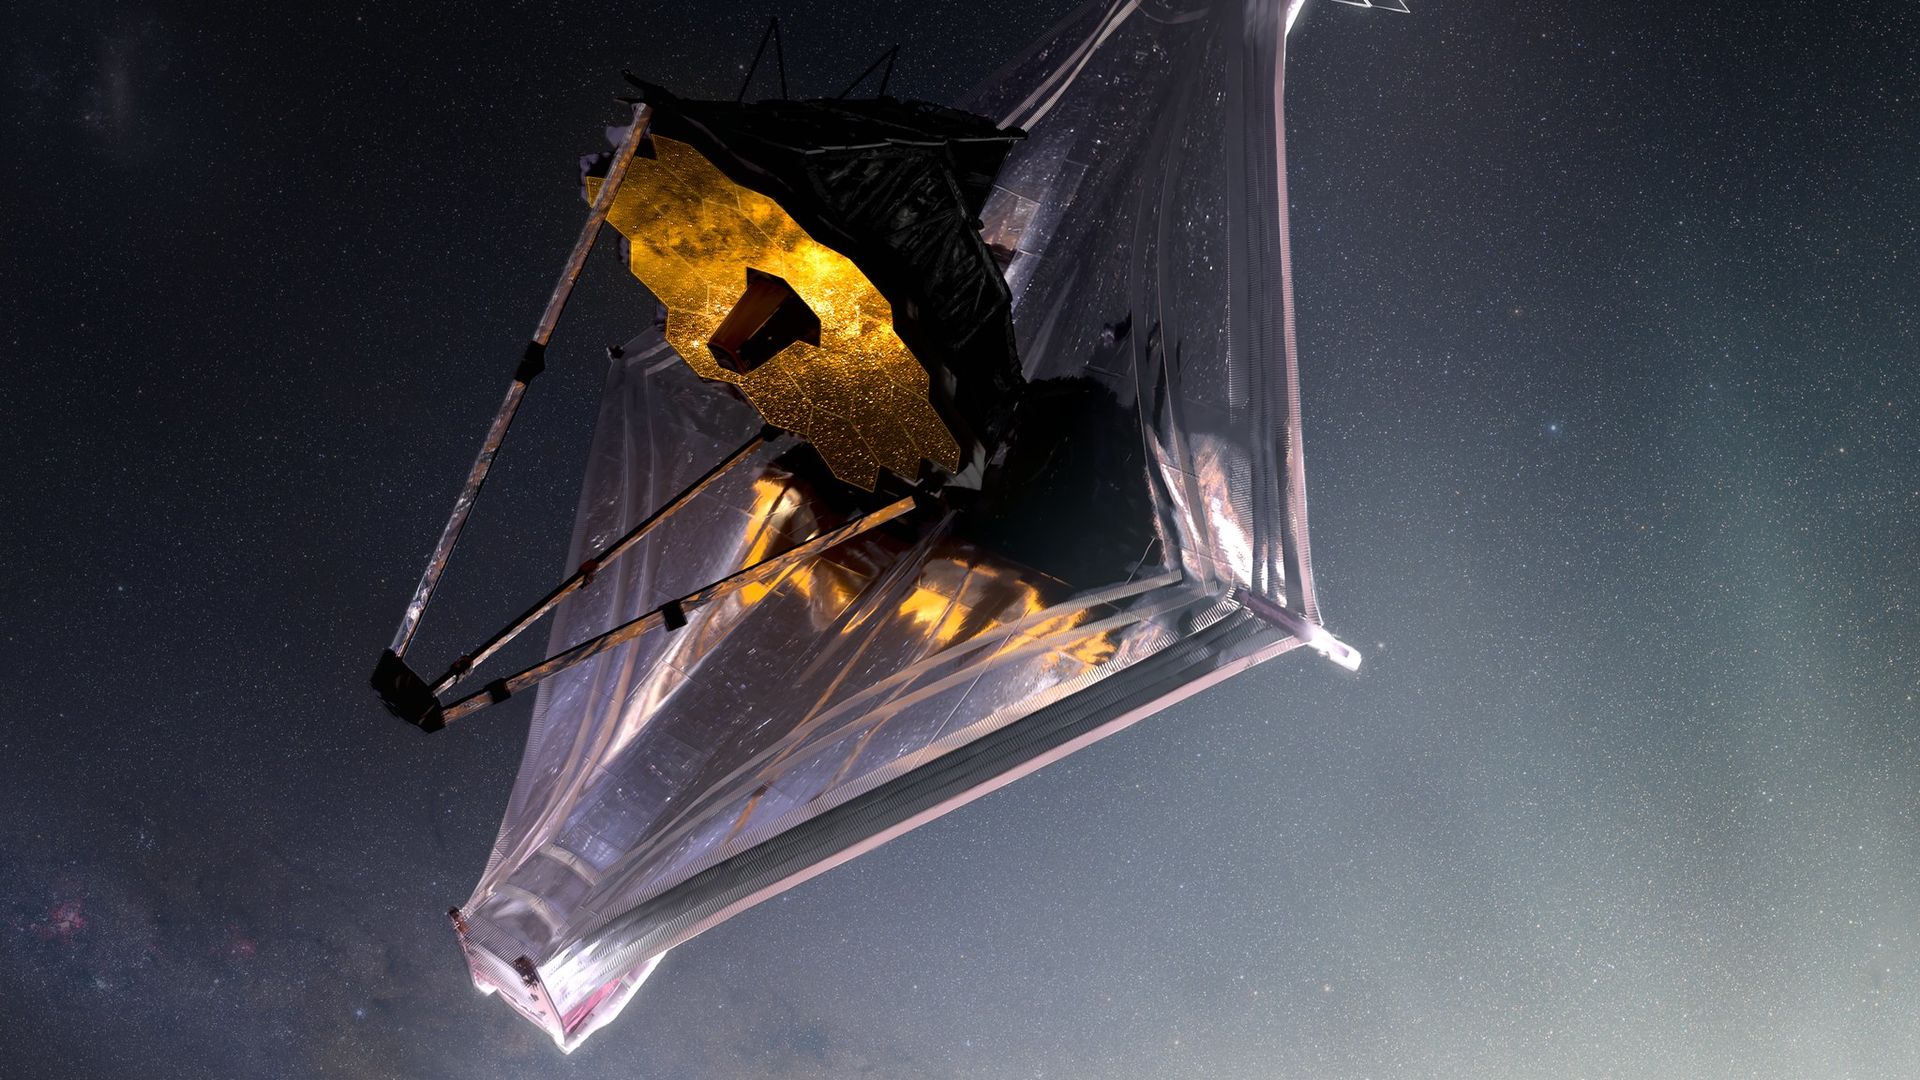 Artist's illustration of the James Webb Space Telescope deployed in space